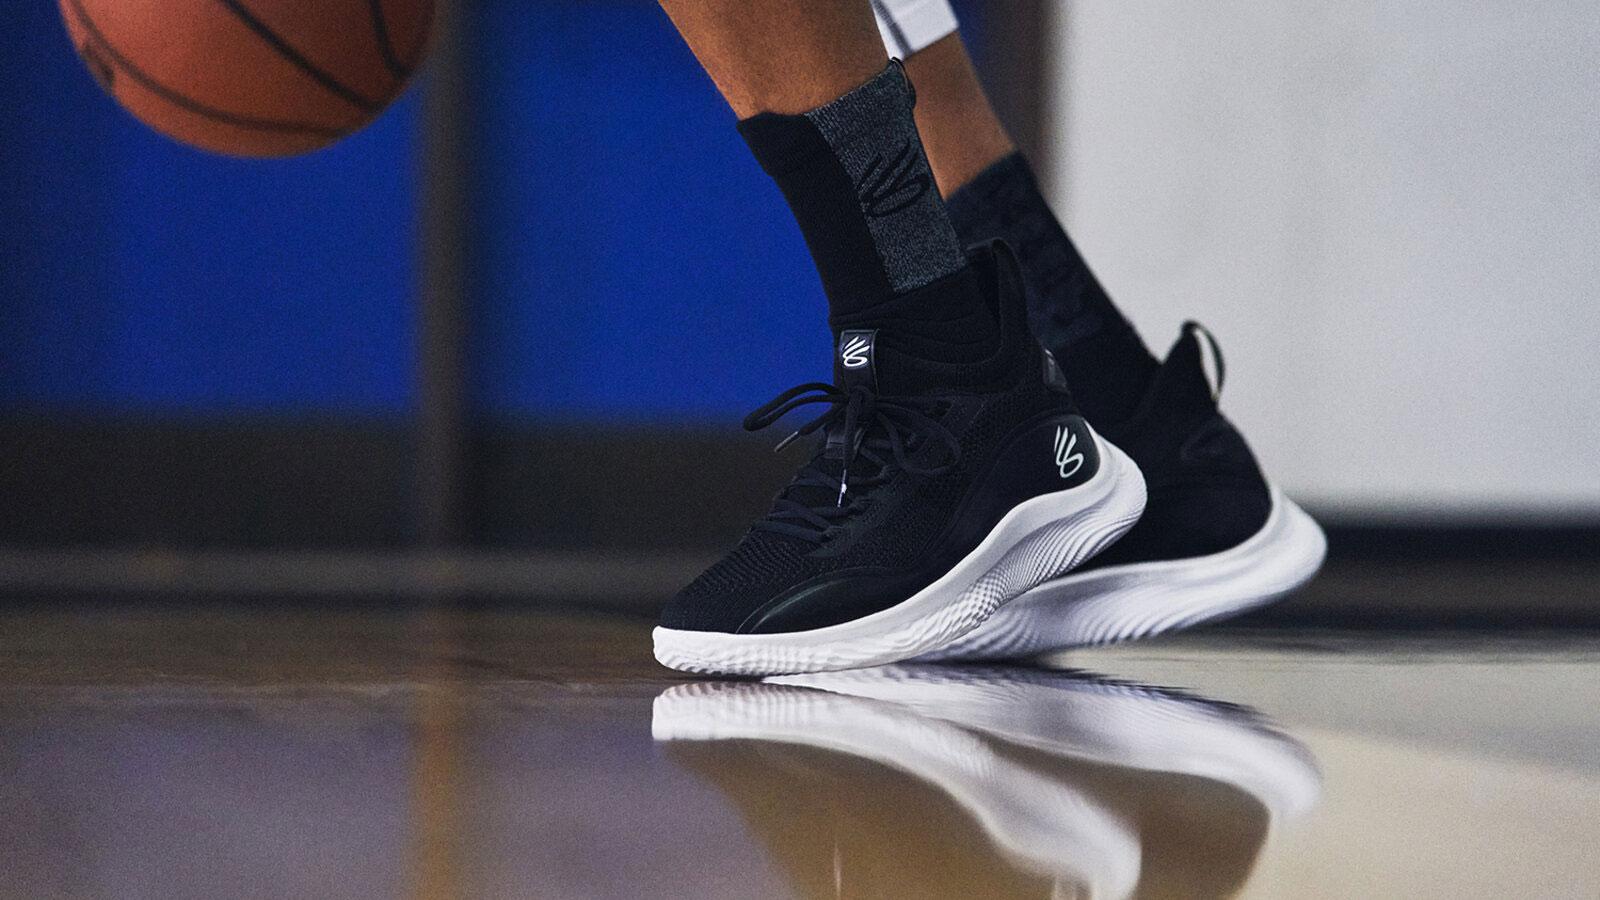 Under Armour’s New Curry Brand Introduces The Curry Flow 8